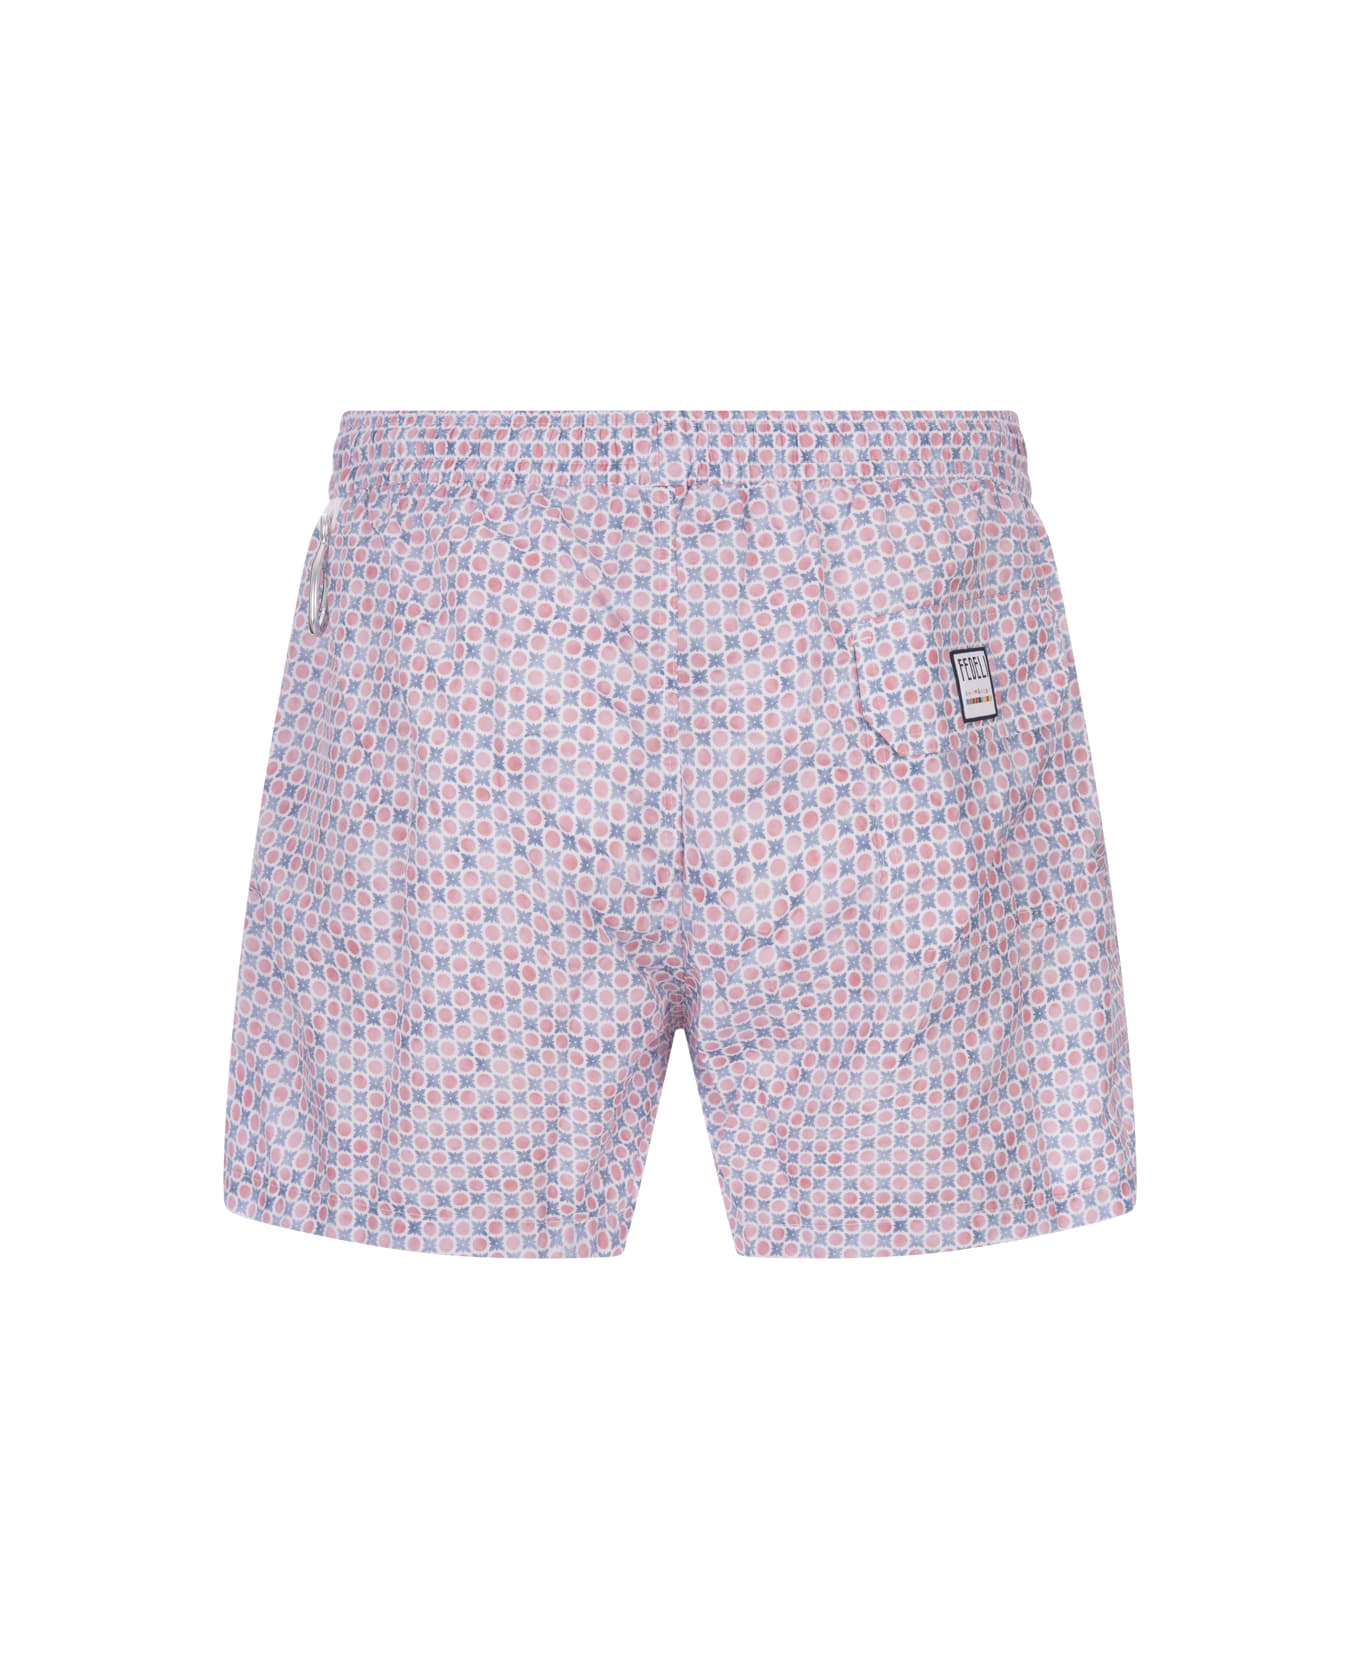 Fedeli Swim Shorts With Micro Pattern Of Polka Dots And Flowers - Pink